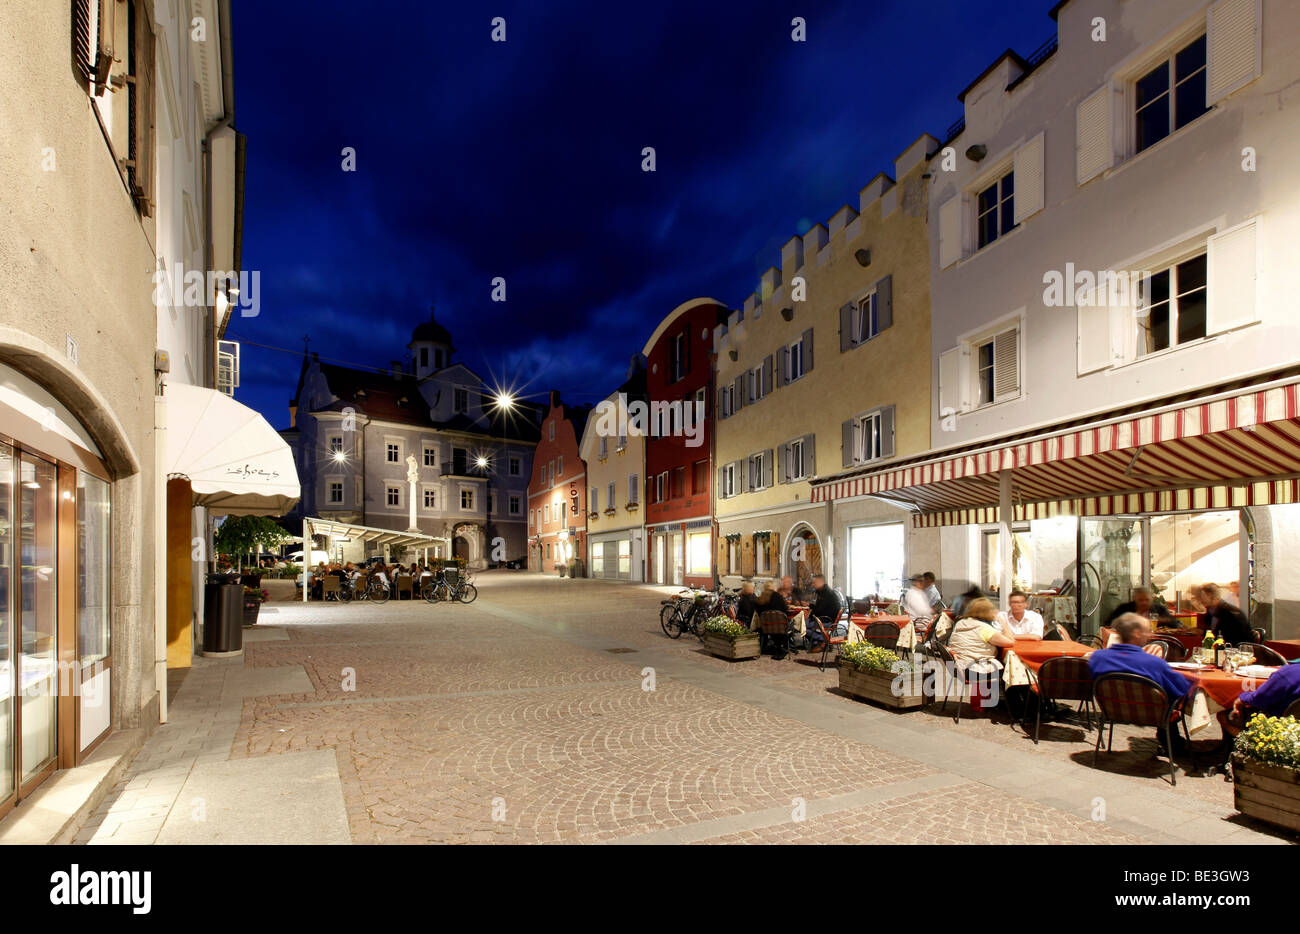 Town alley, Bruneck, Val Pusteria, Alto Adige, Italy, Europe Stock Photo